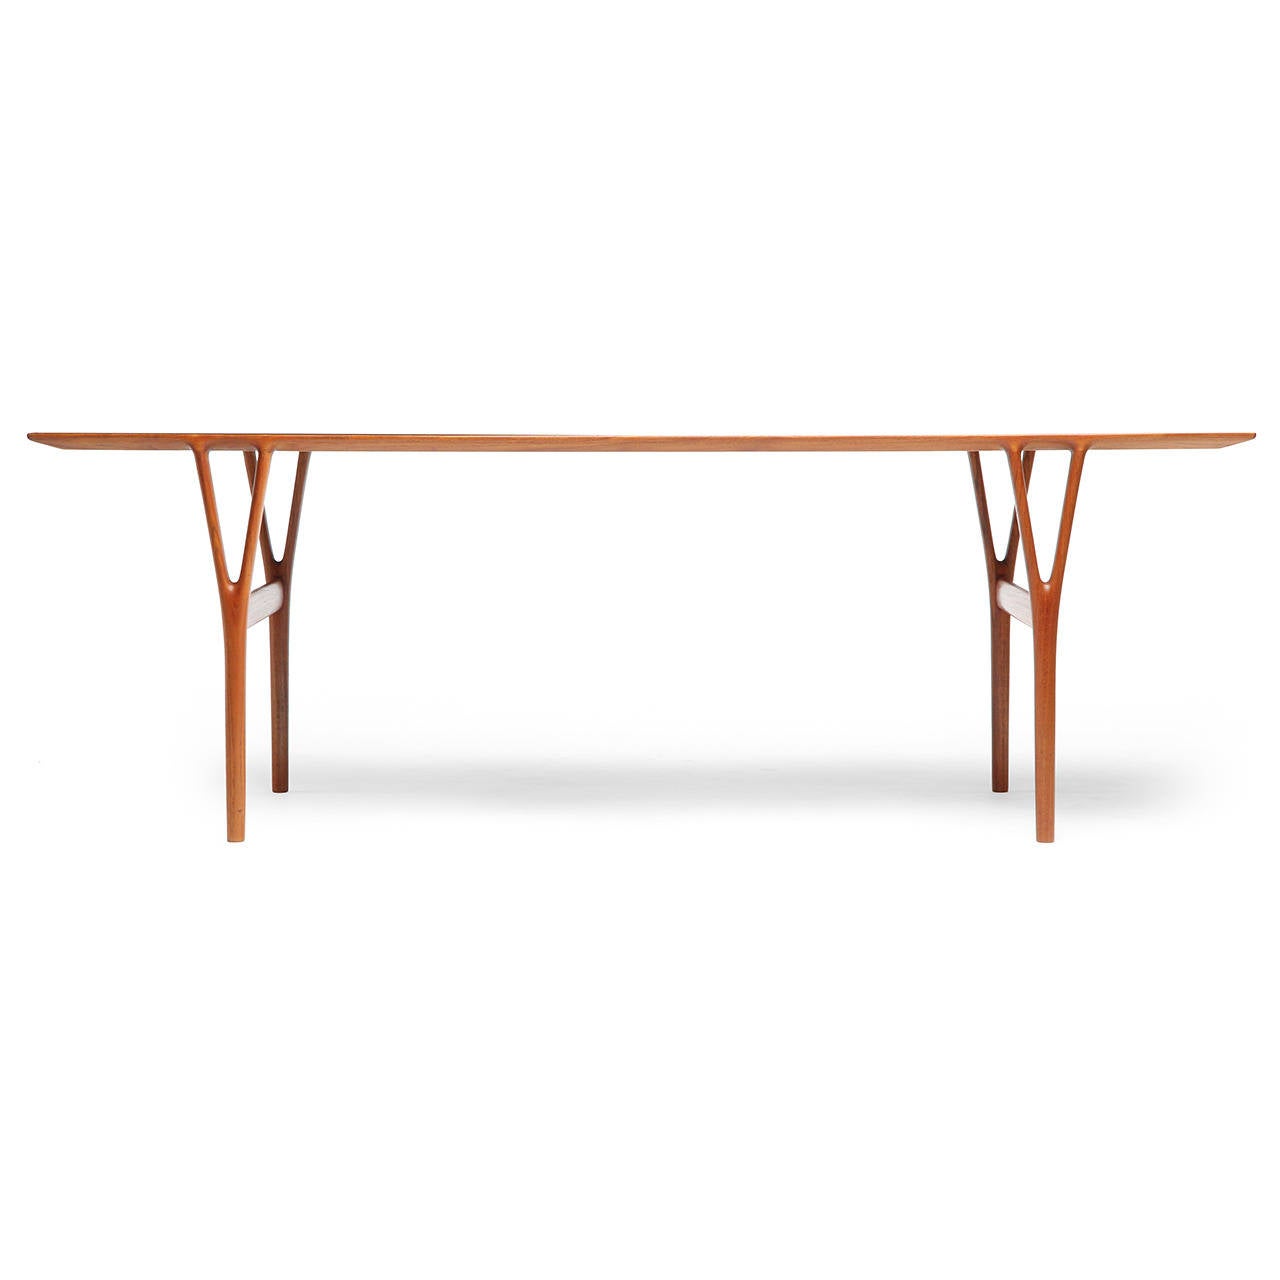 A refined and sculptural Scandinavian Modern low table by Helge Vestergaard-Jensen featuring a spare 